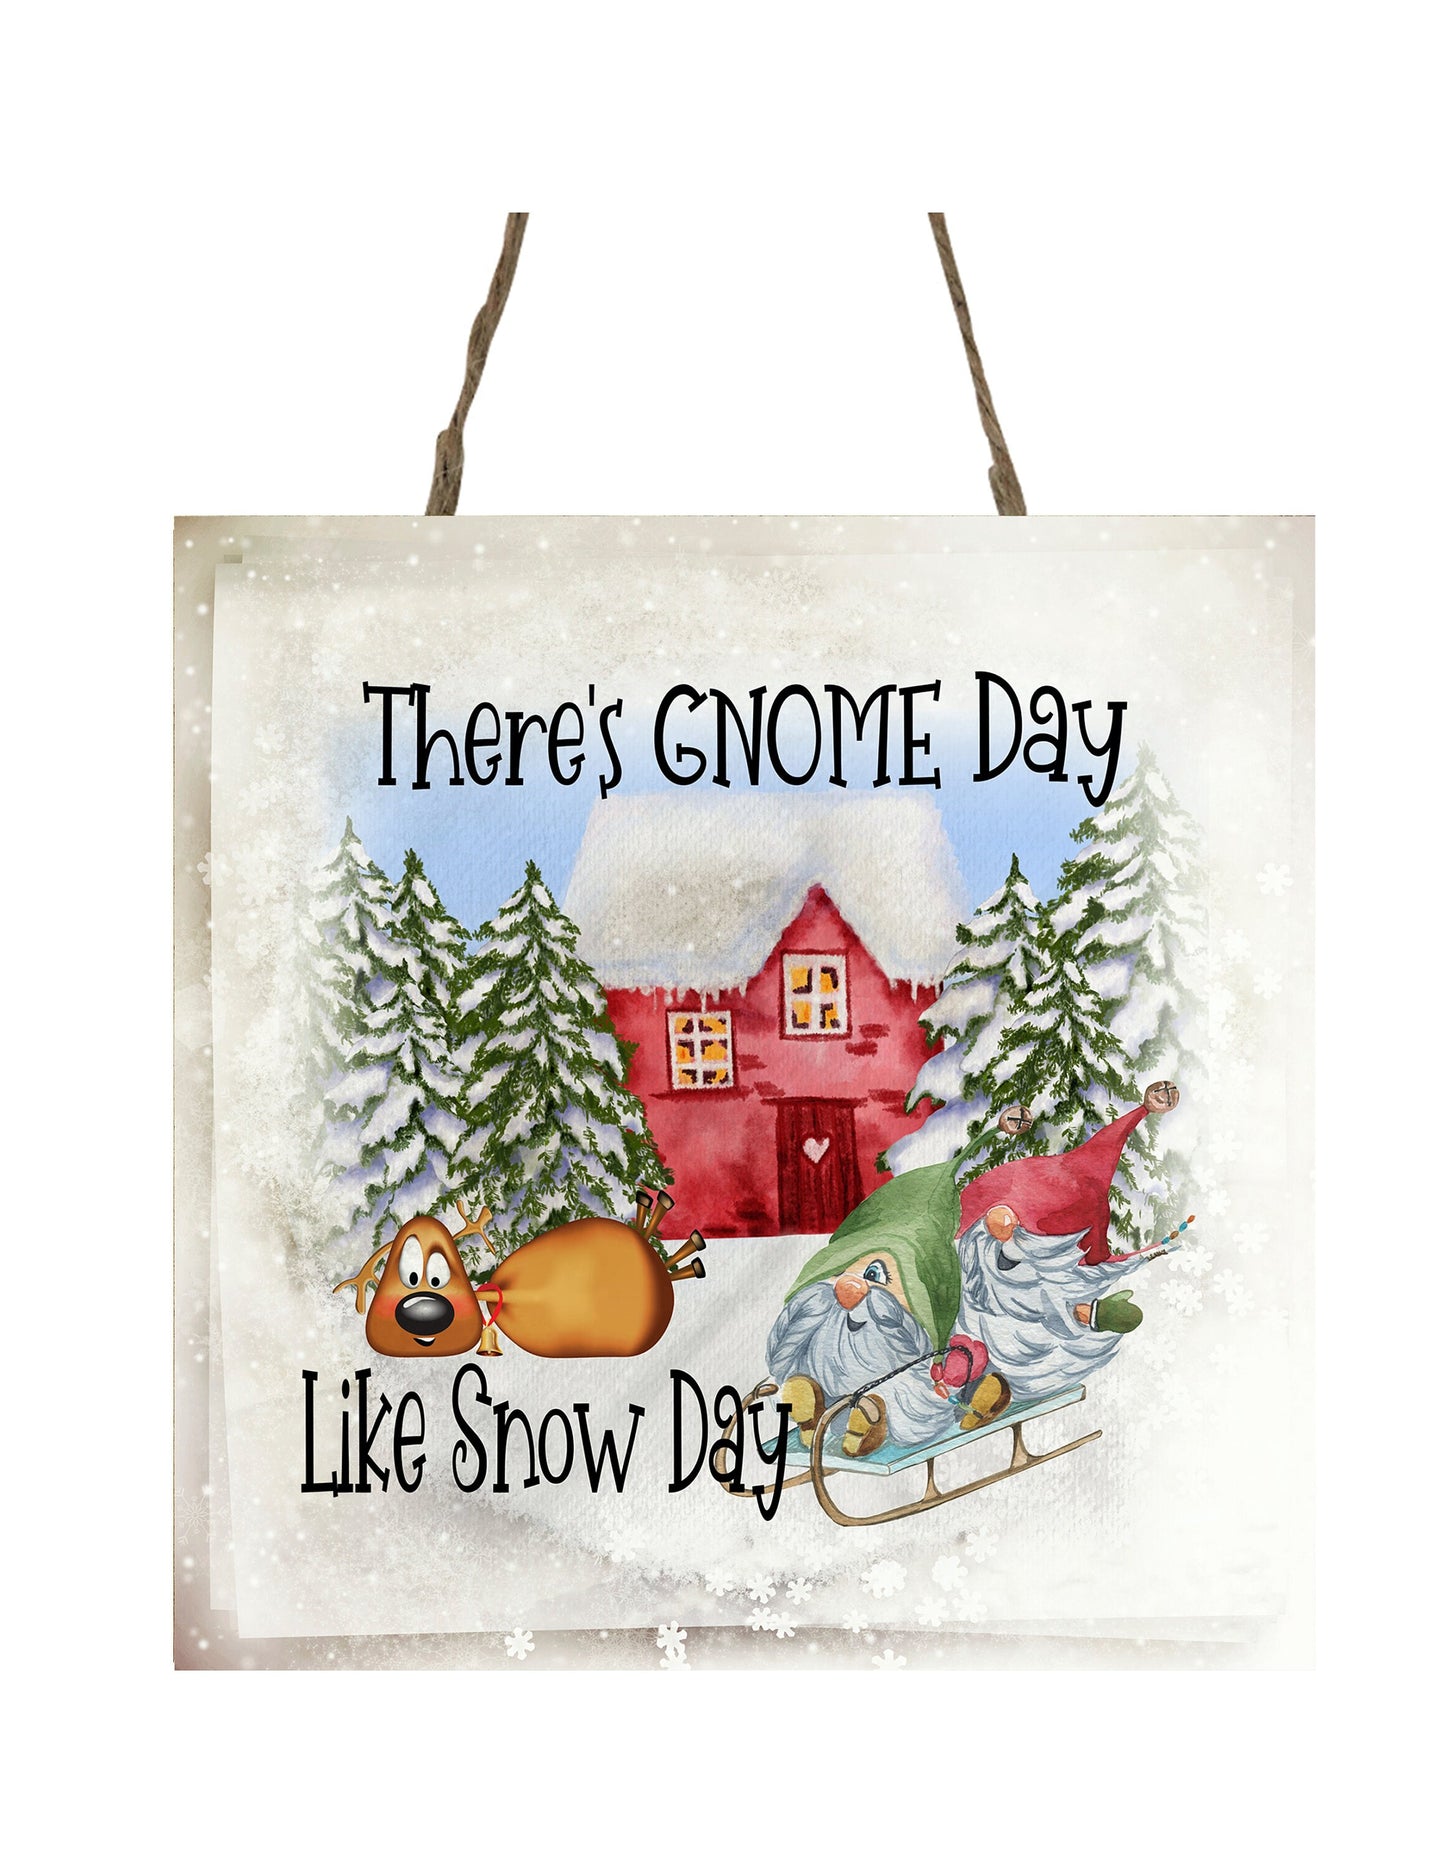 There's Gnome Day Like Snow Days  Printed Wood Christmas Ornament Mini Sign